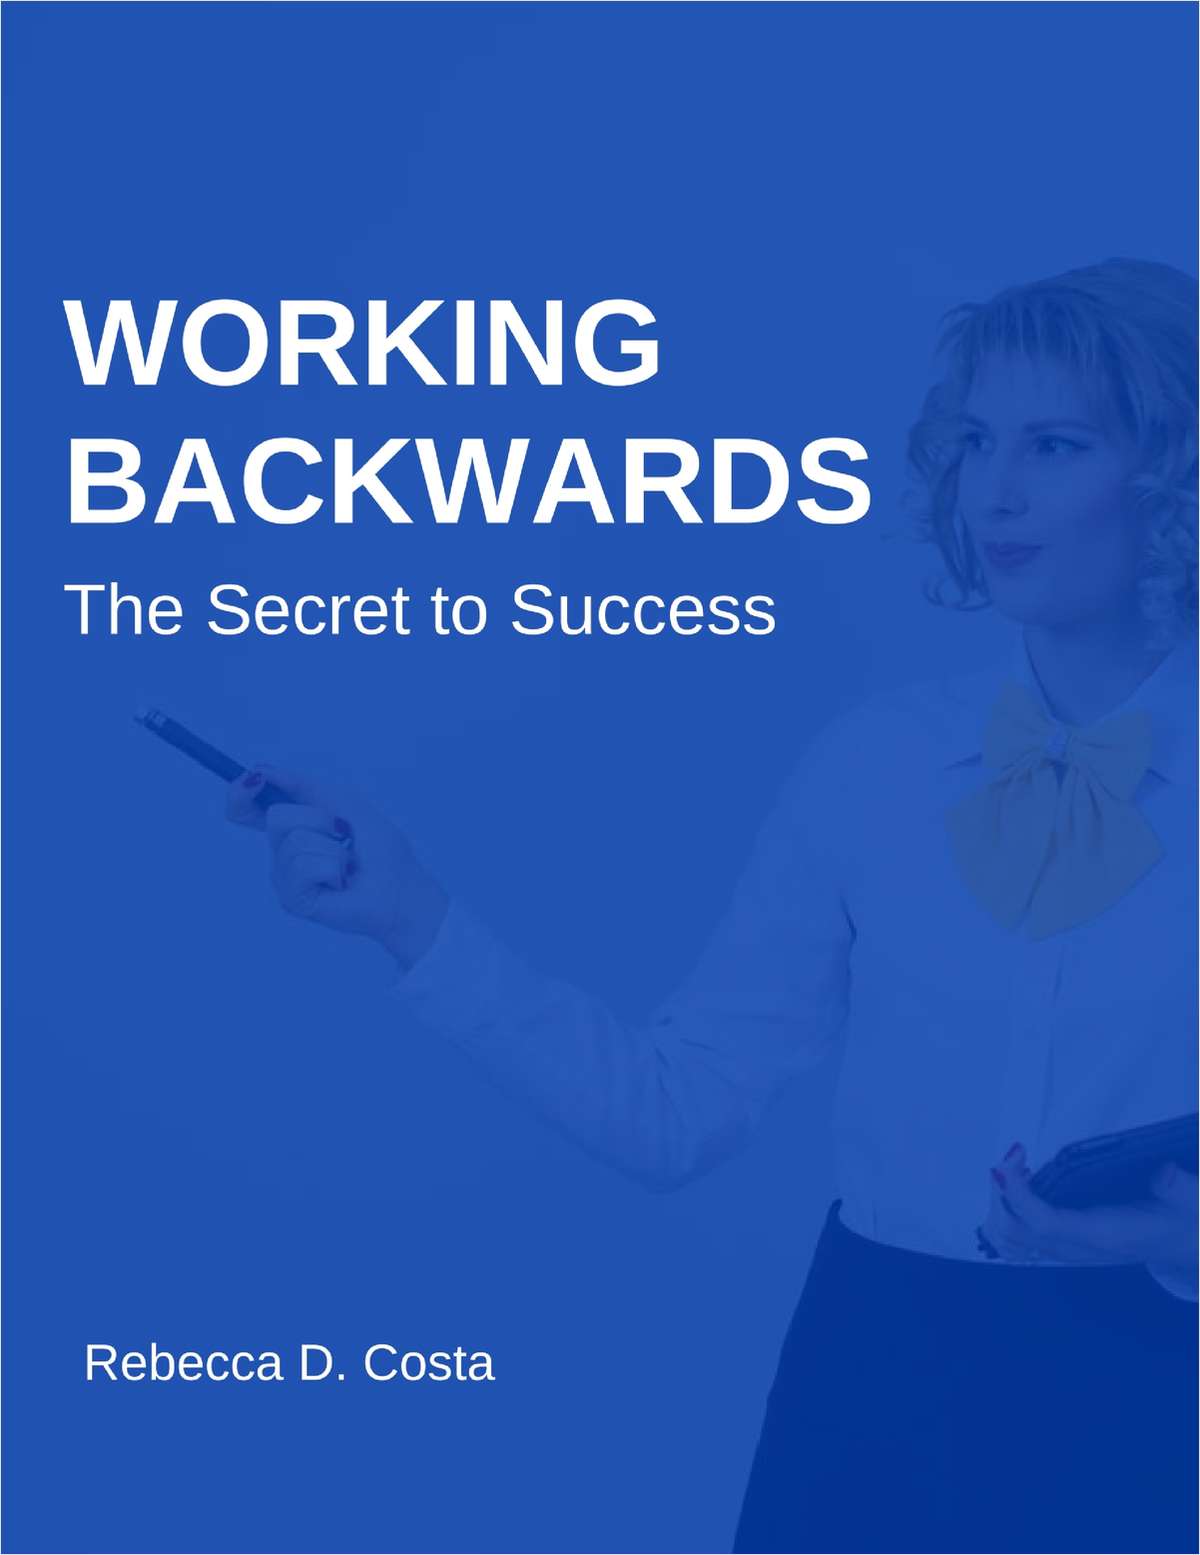 Working Backwards - The Secret to Success